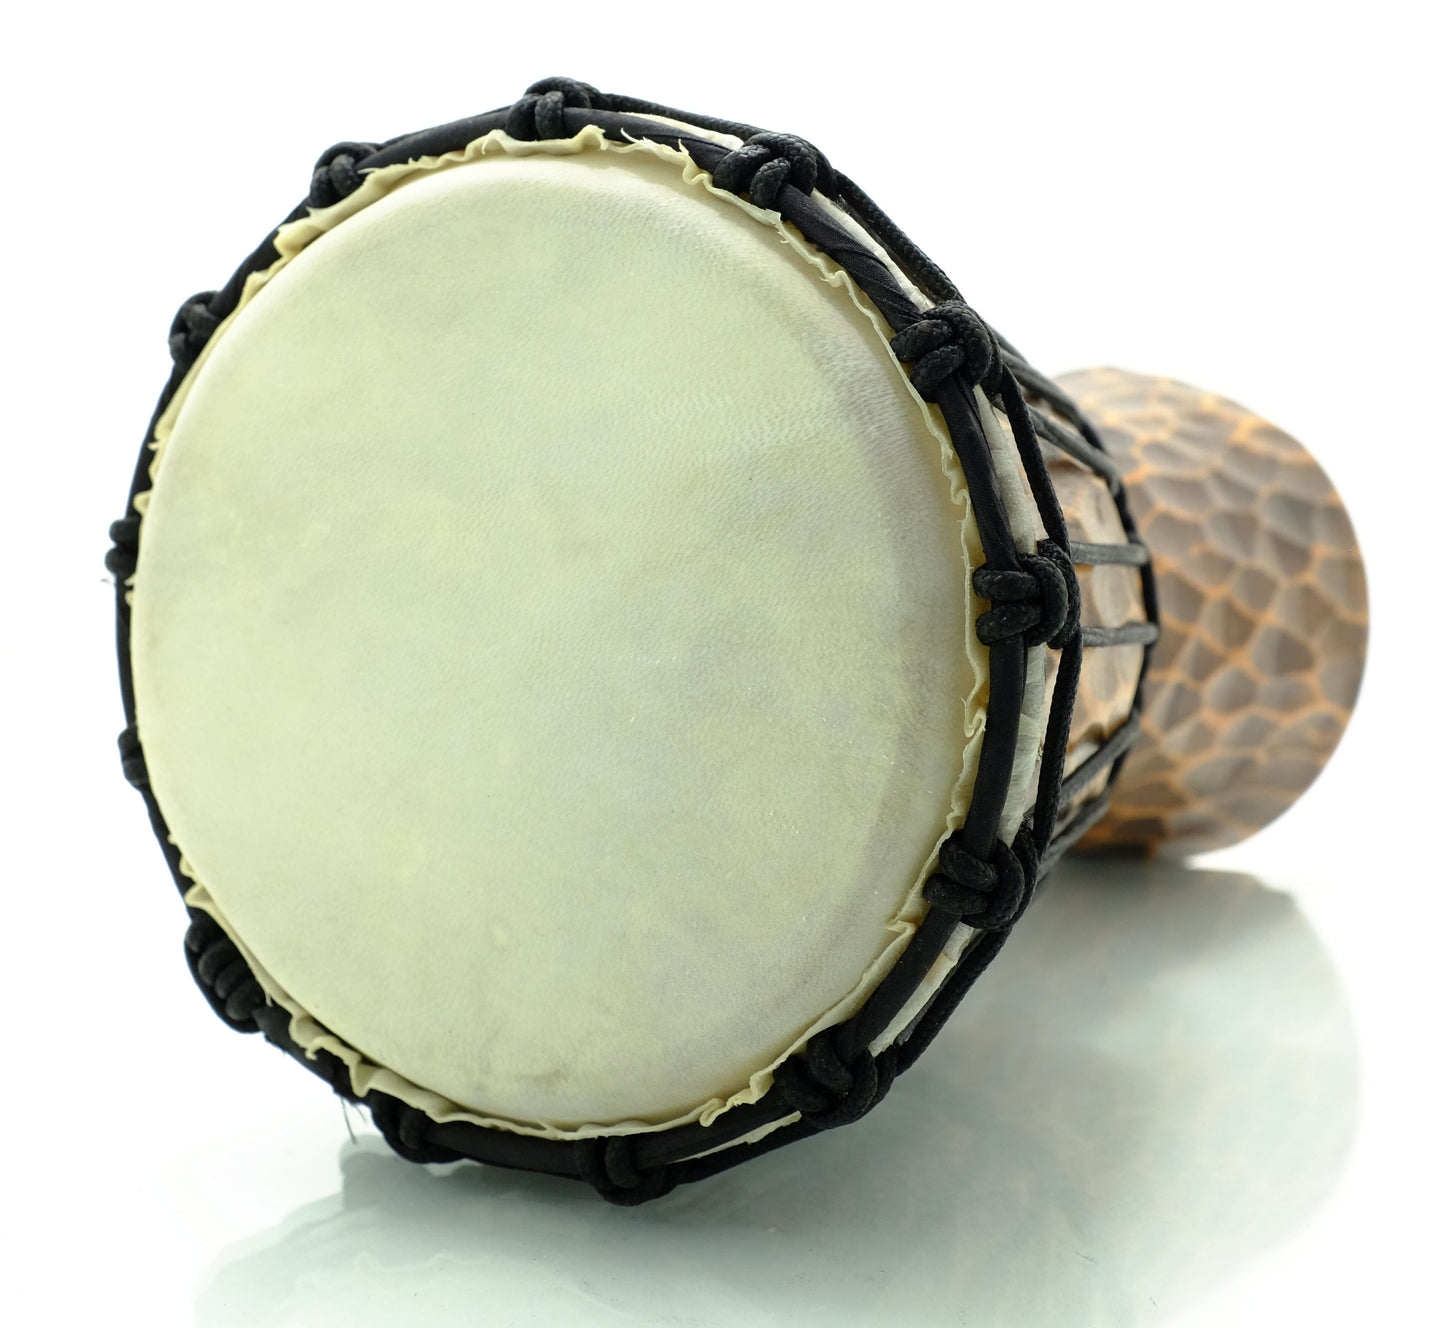 Mahogany Djembe Drums - Available in 5 Sizes